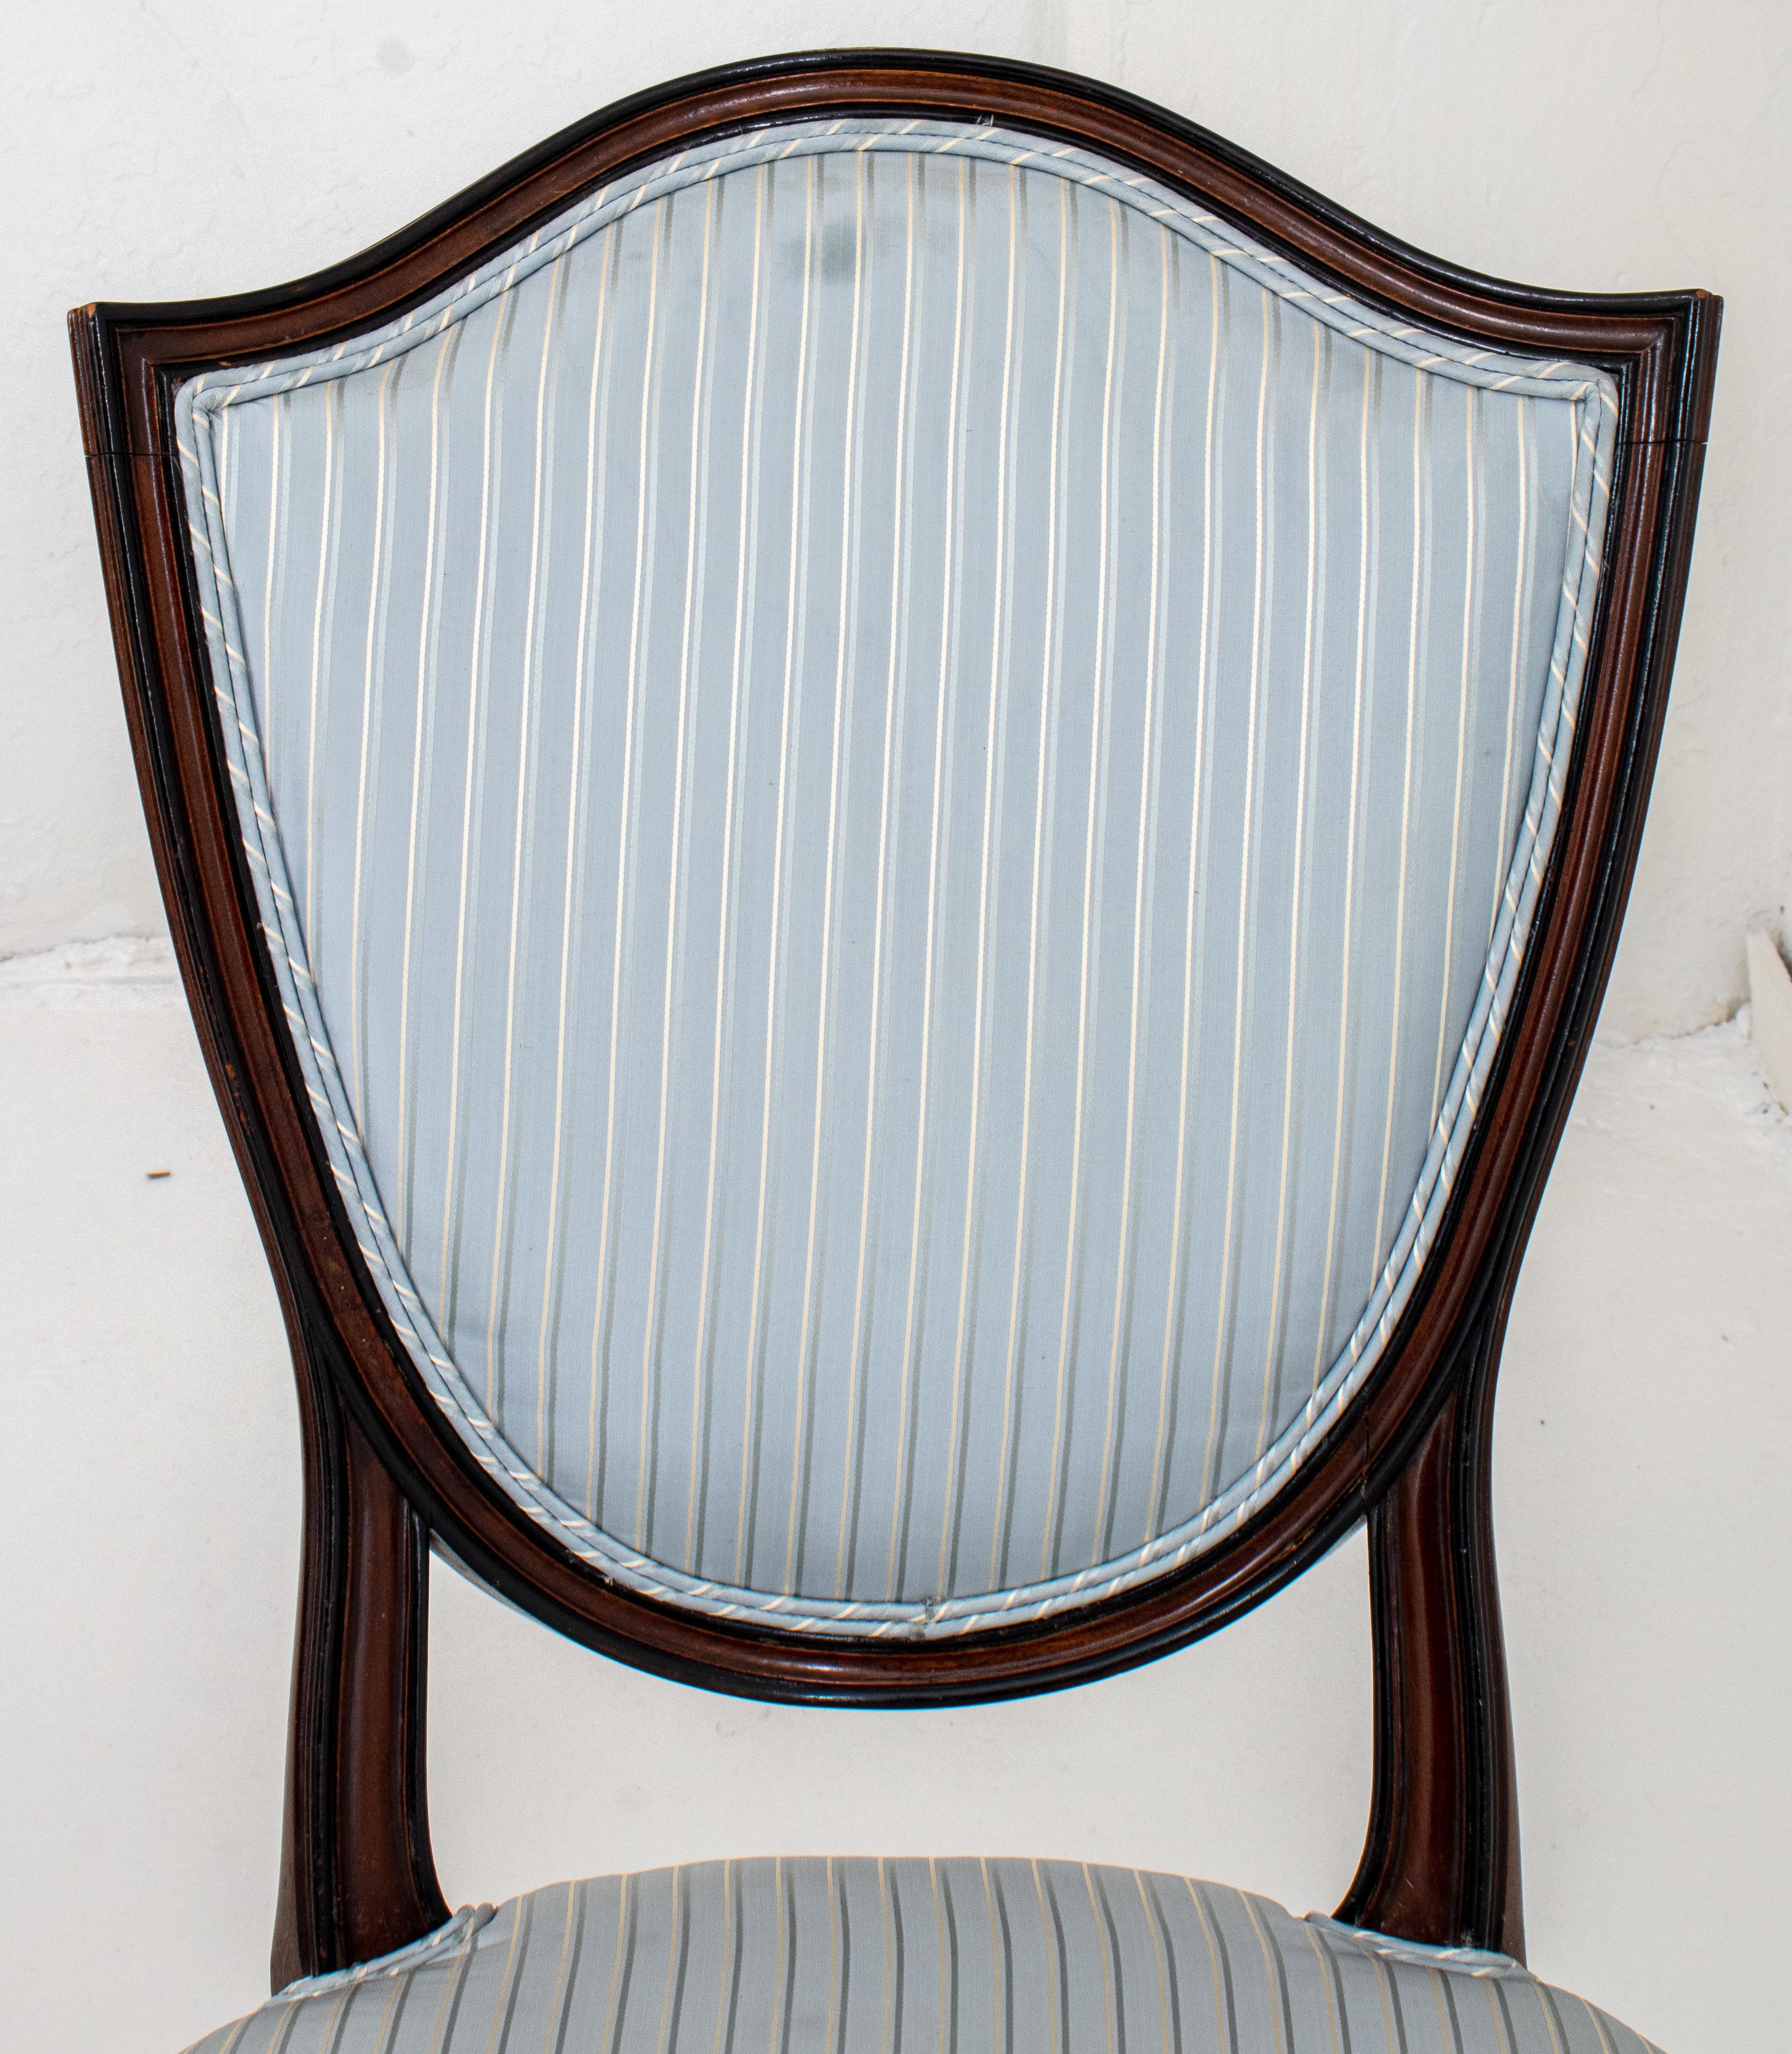 Sheraton Manner Shield-Back Dining Chairs, 14 3